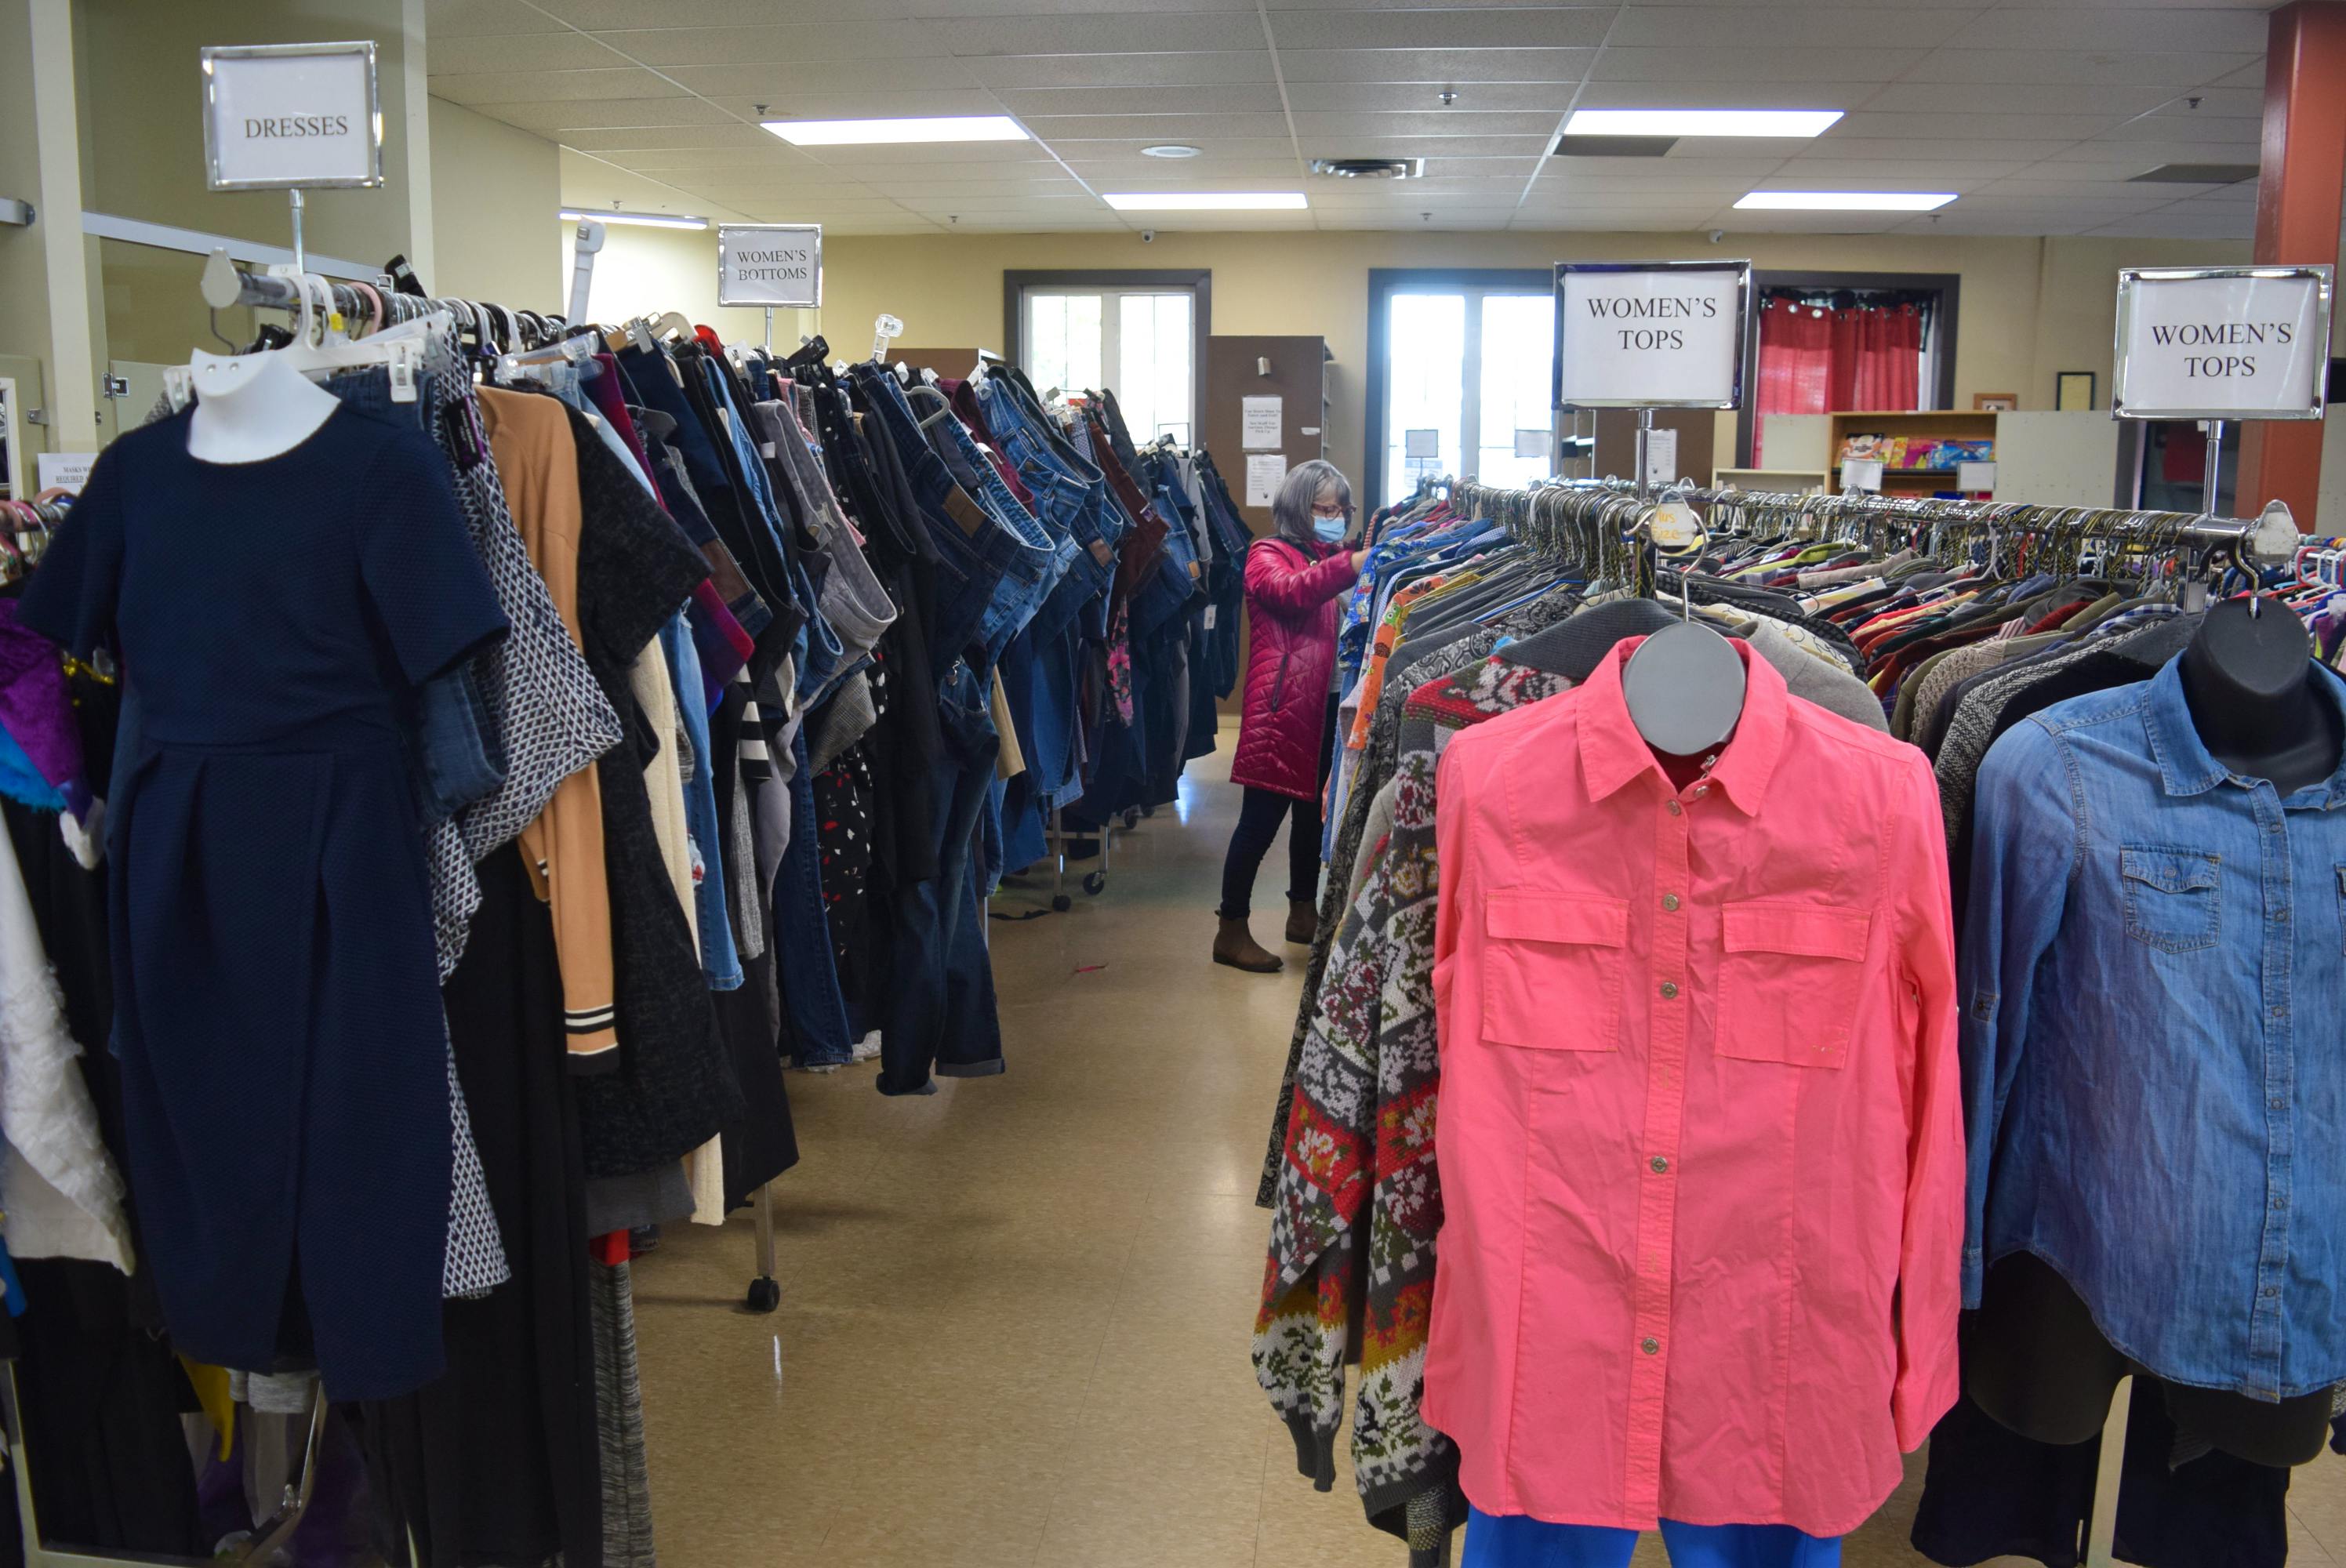 Second-hand clothes picking up steam as people seek environment